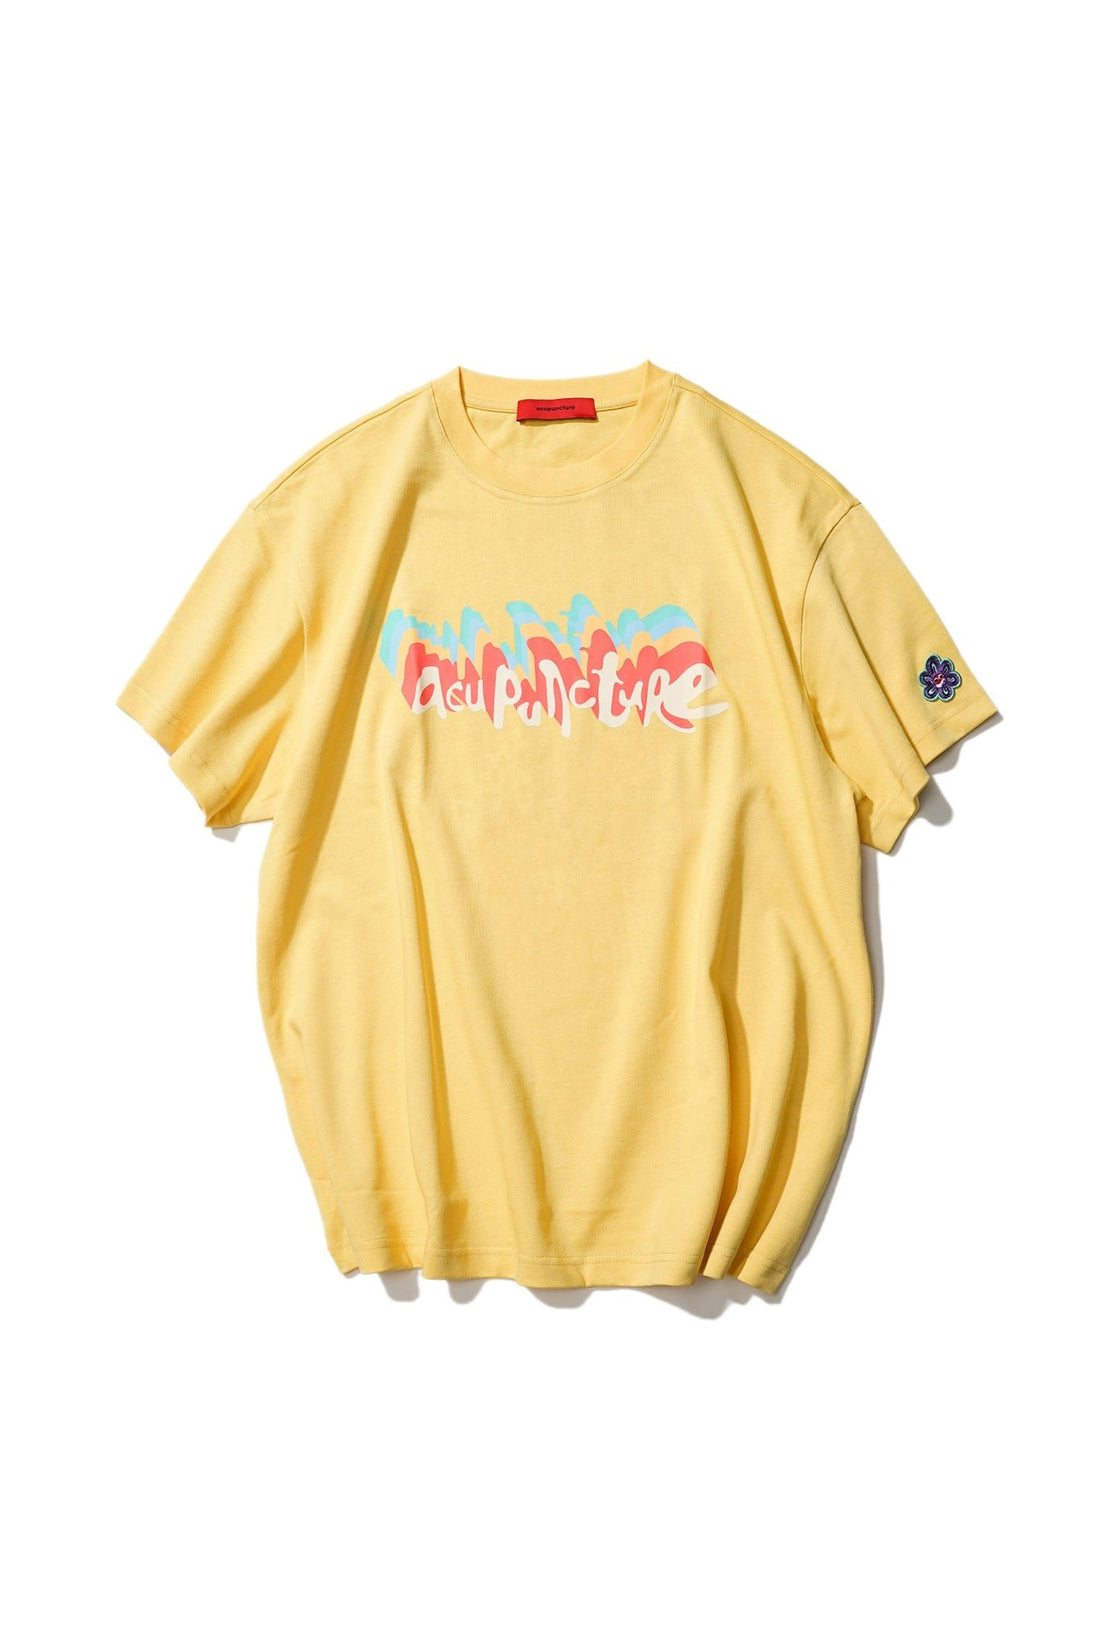 CIRCLE A T-SHIRT YELLOW Acupuncture